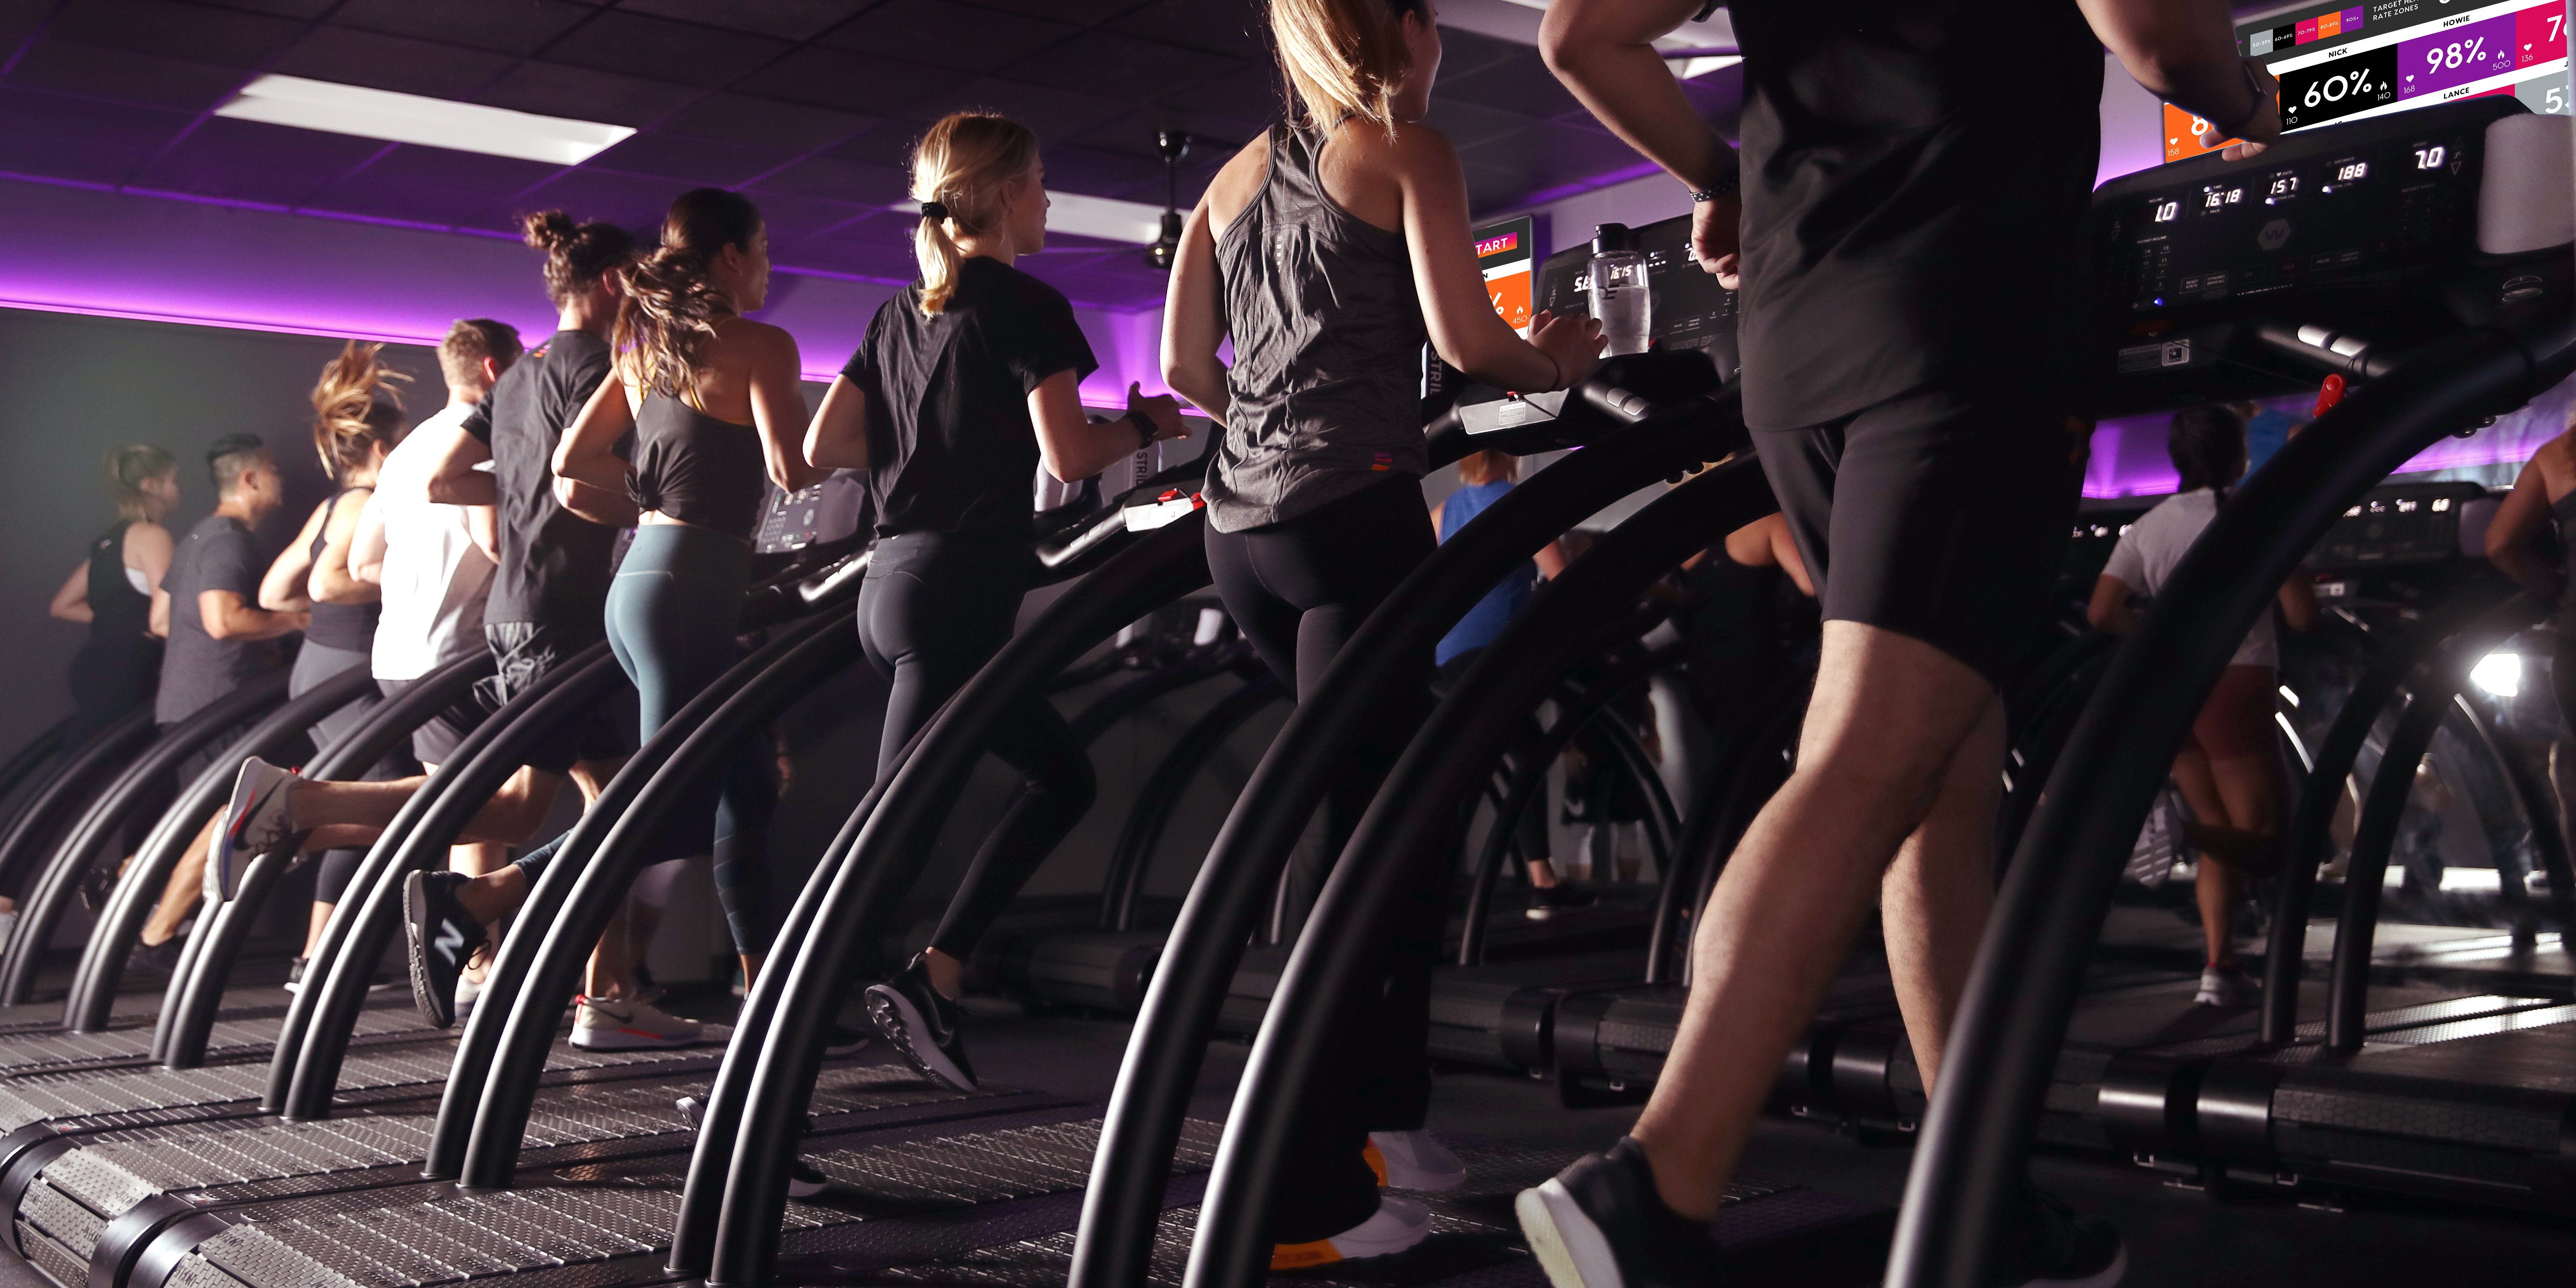 HOTWORX - South Yarra: Read Reviews and Book Classes on ClassPass